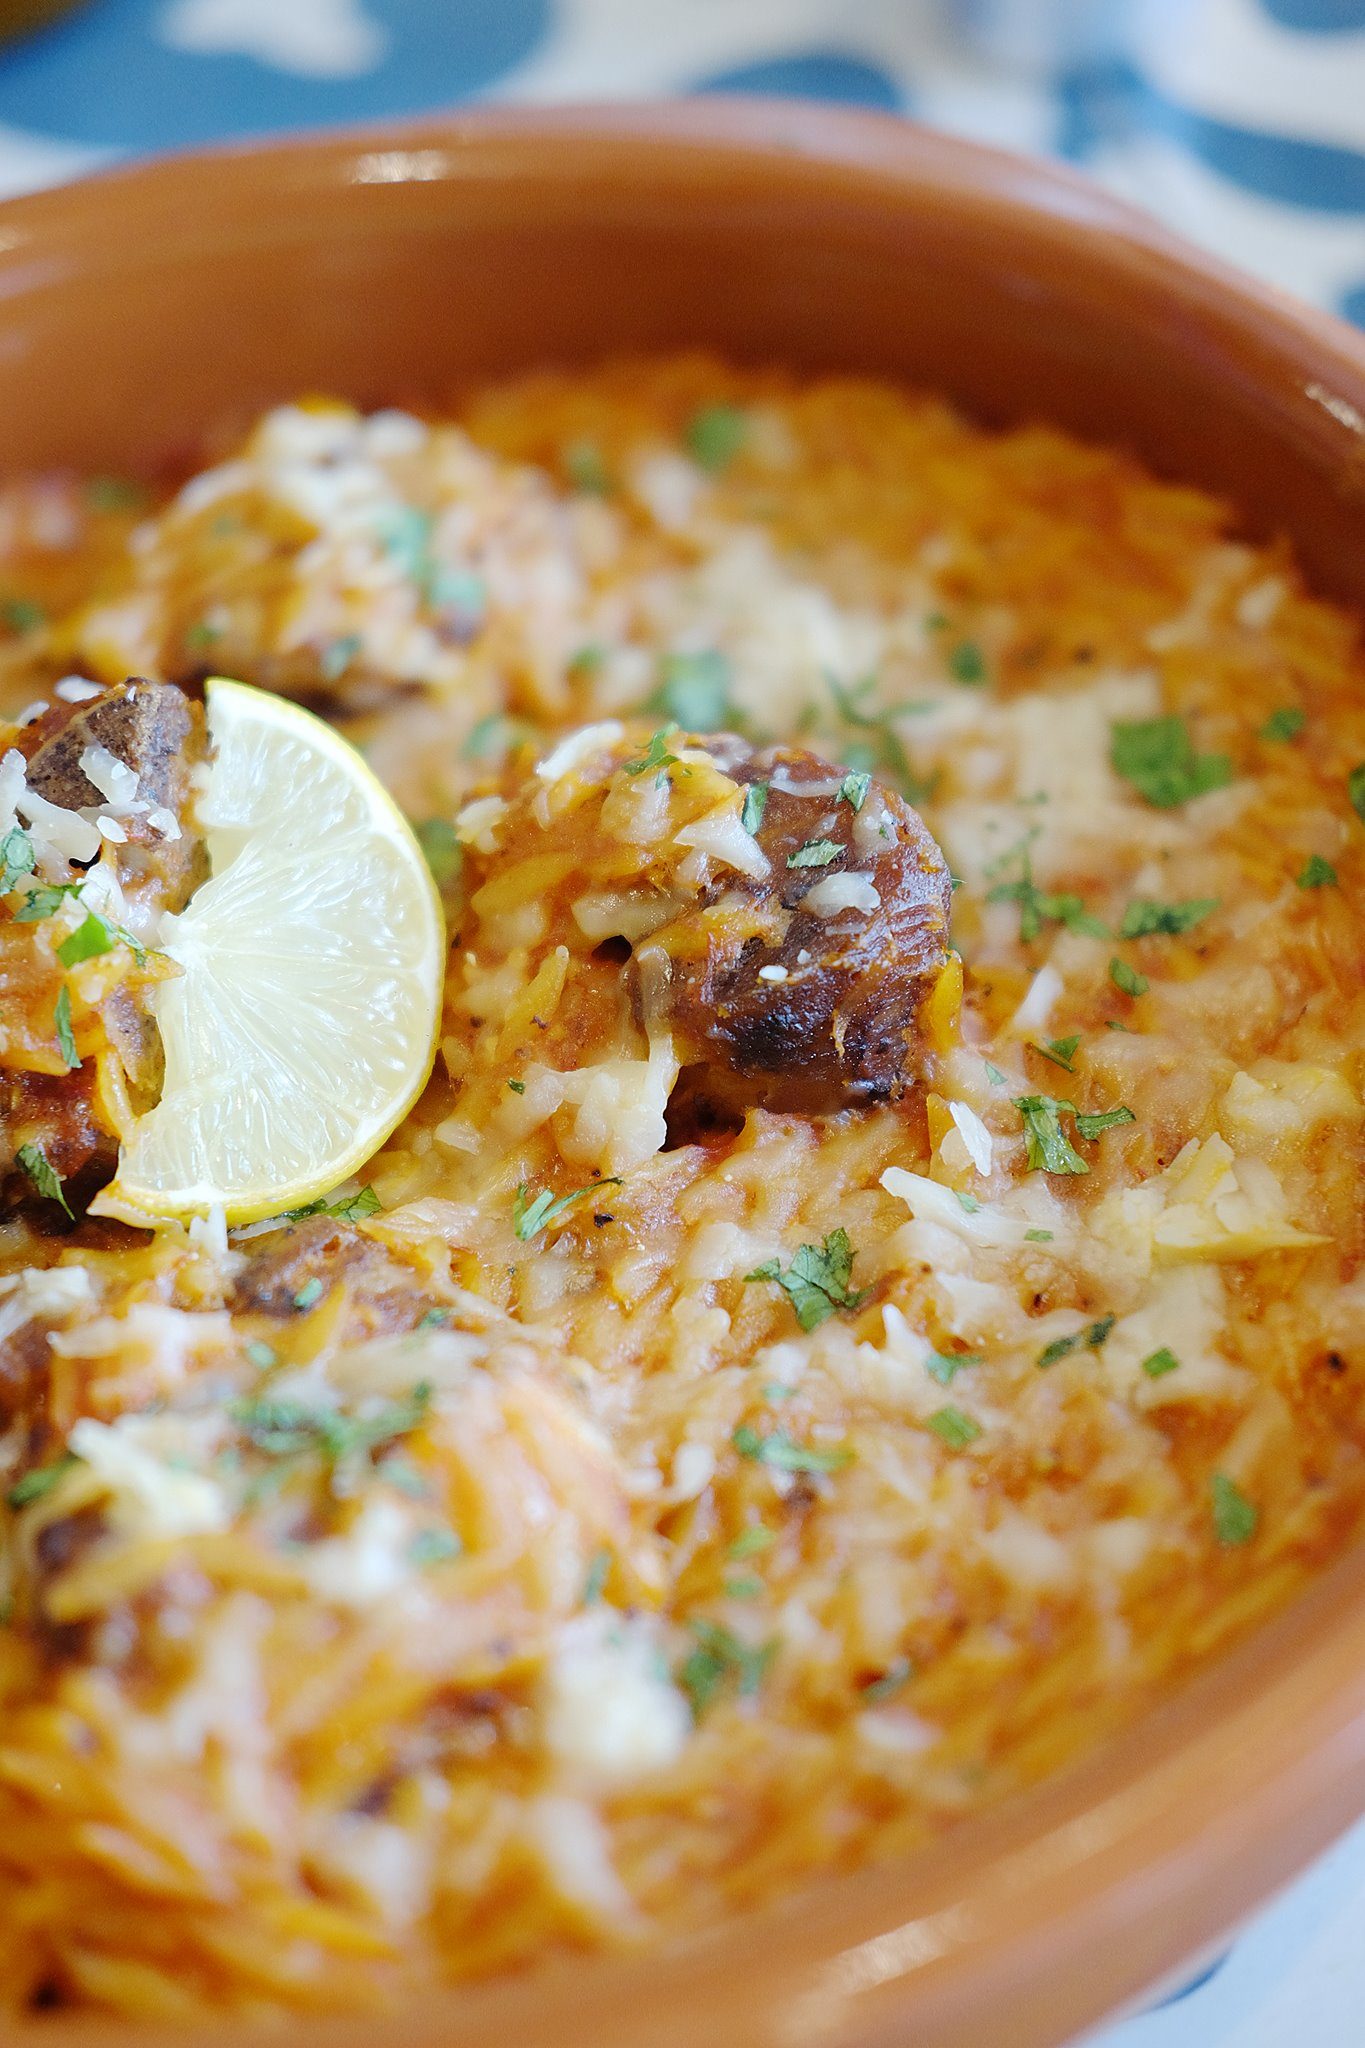 HEARTY. The lamb yiouvetsi is a meaty dish reminiscent of paella. Photo courtesy of Souv 